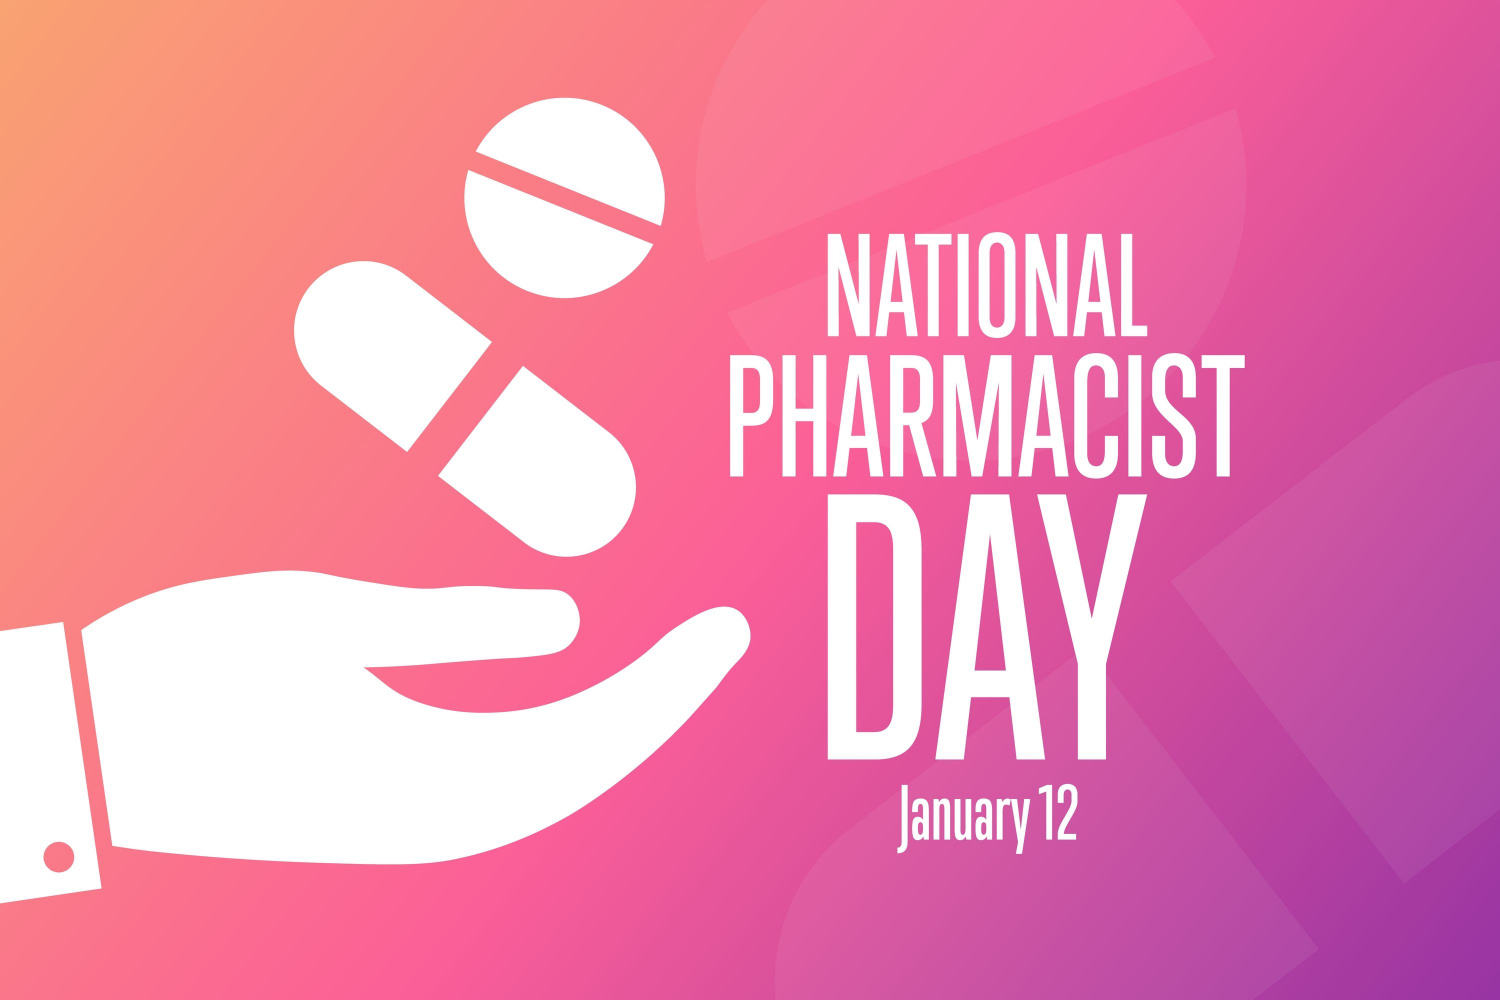 National Pharmacist Day is January 12th Virginia Department of Health